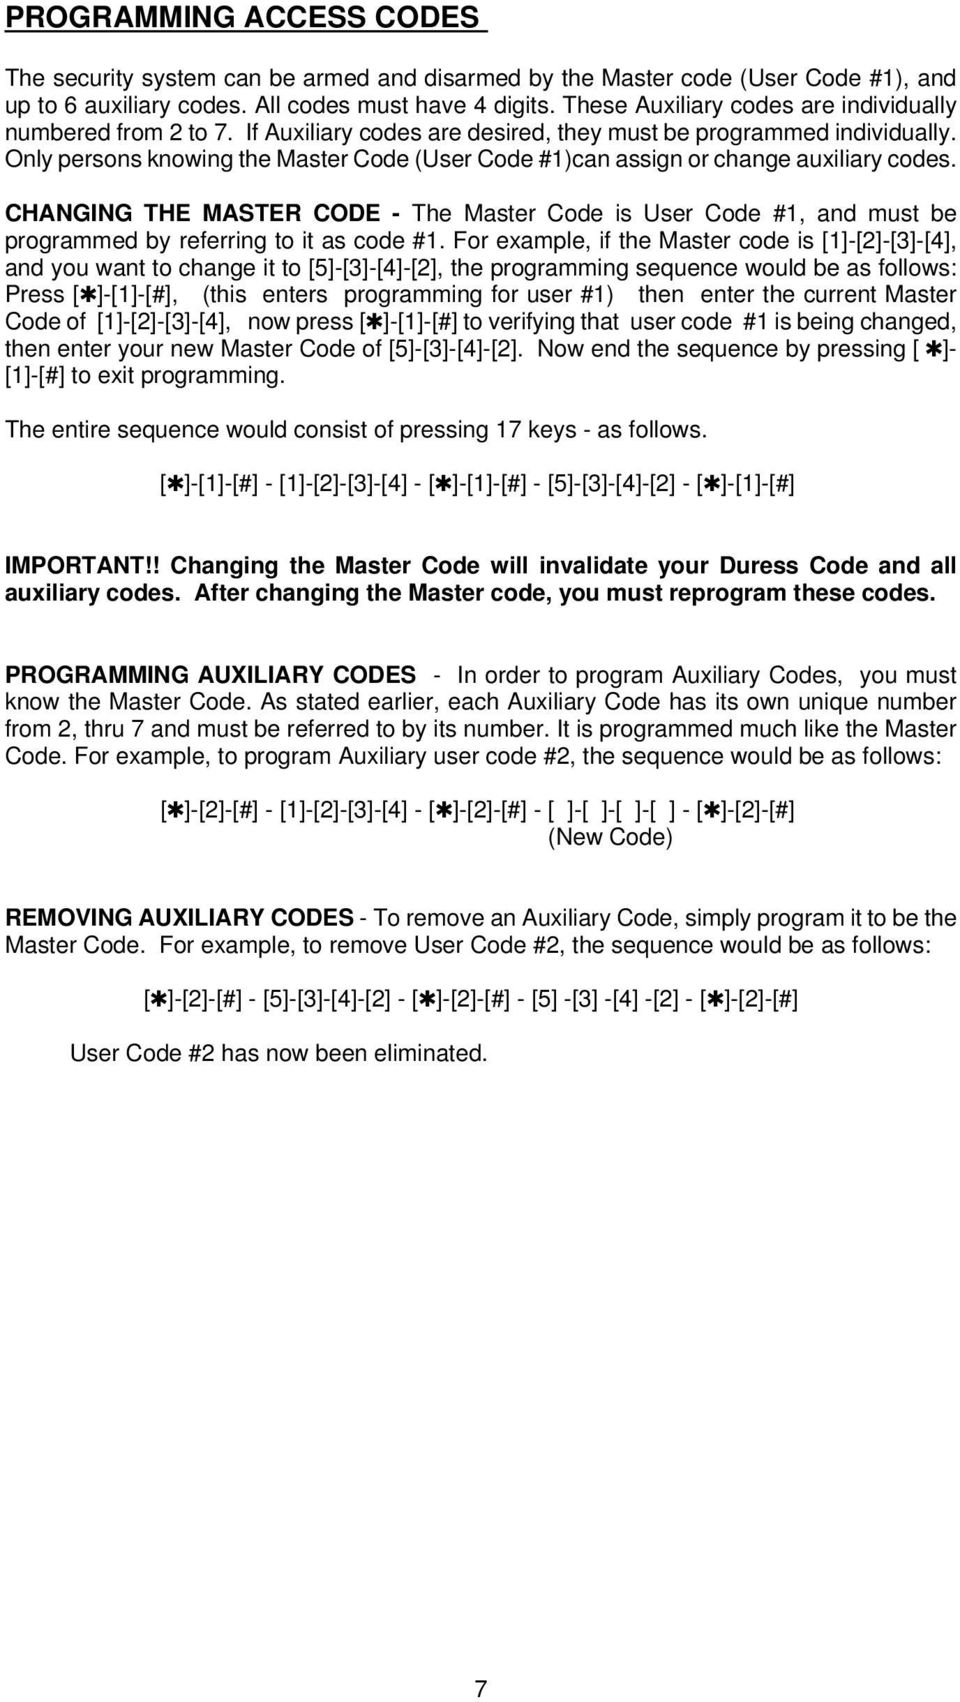 Only persons knowing the Master Code (User Code #1)can assign or change auxiliary codes.